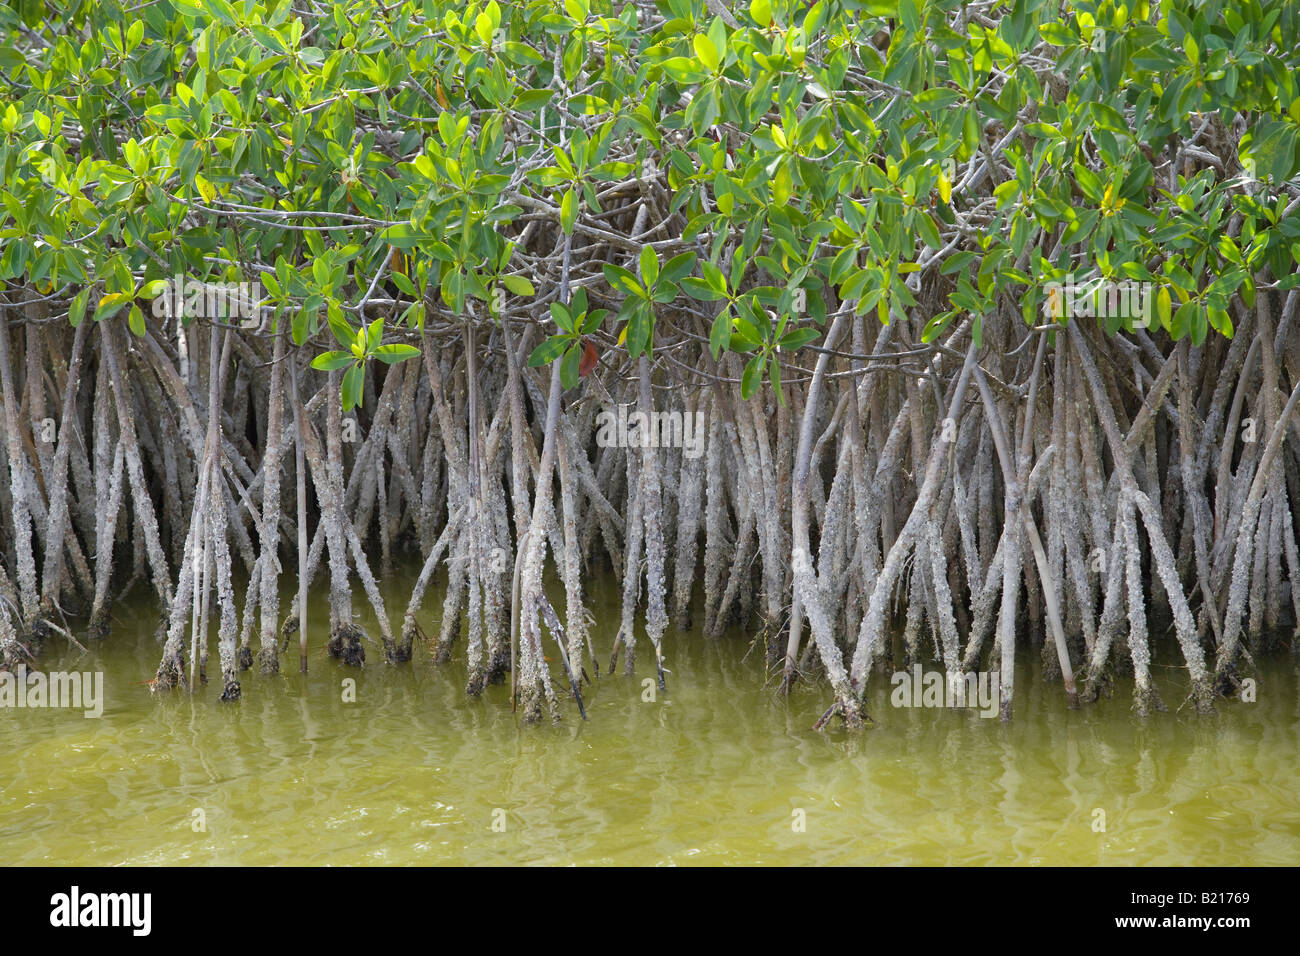 Mangrove growing in shallow water in the Everglades National Park in Florida Stock Photo